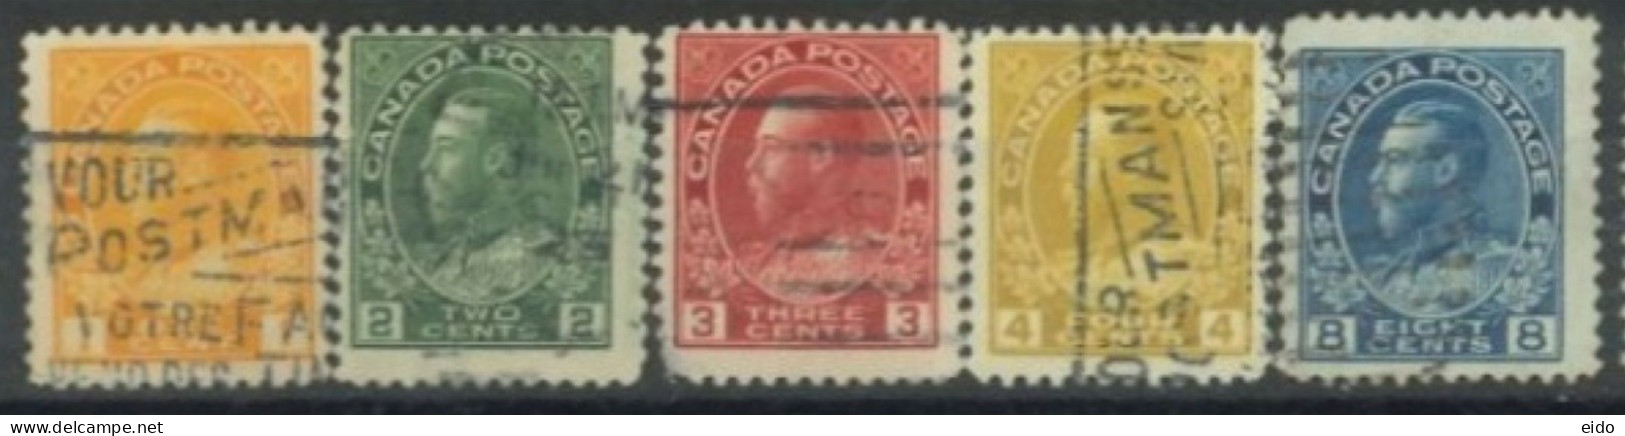 CANADA - 1922, KING GEORGE V STAMPS SET OF 5, USED. - Used Stamps